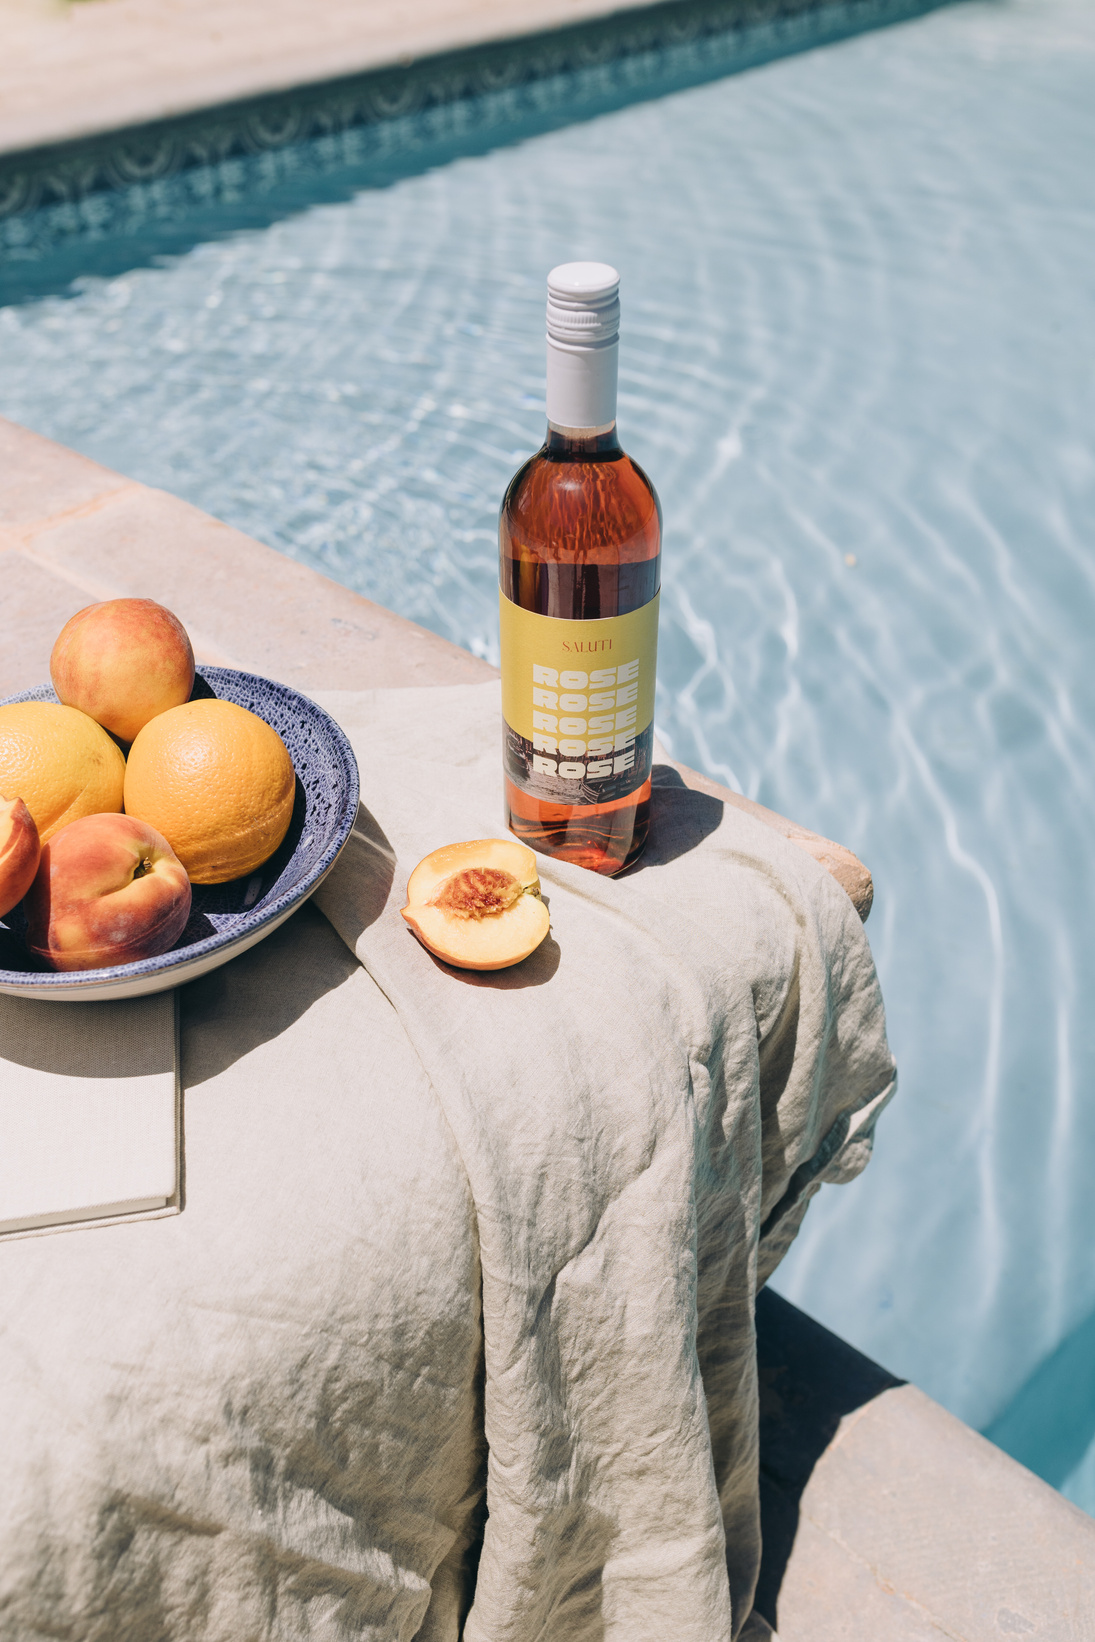 Wine and Fruits on the Table by the Swimming Pool